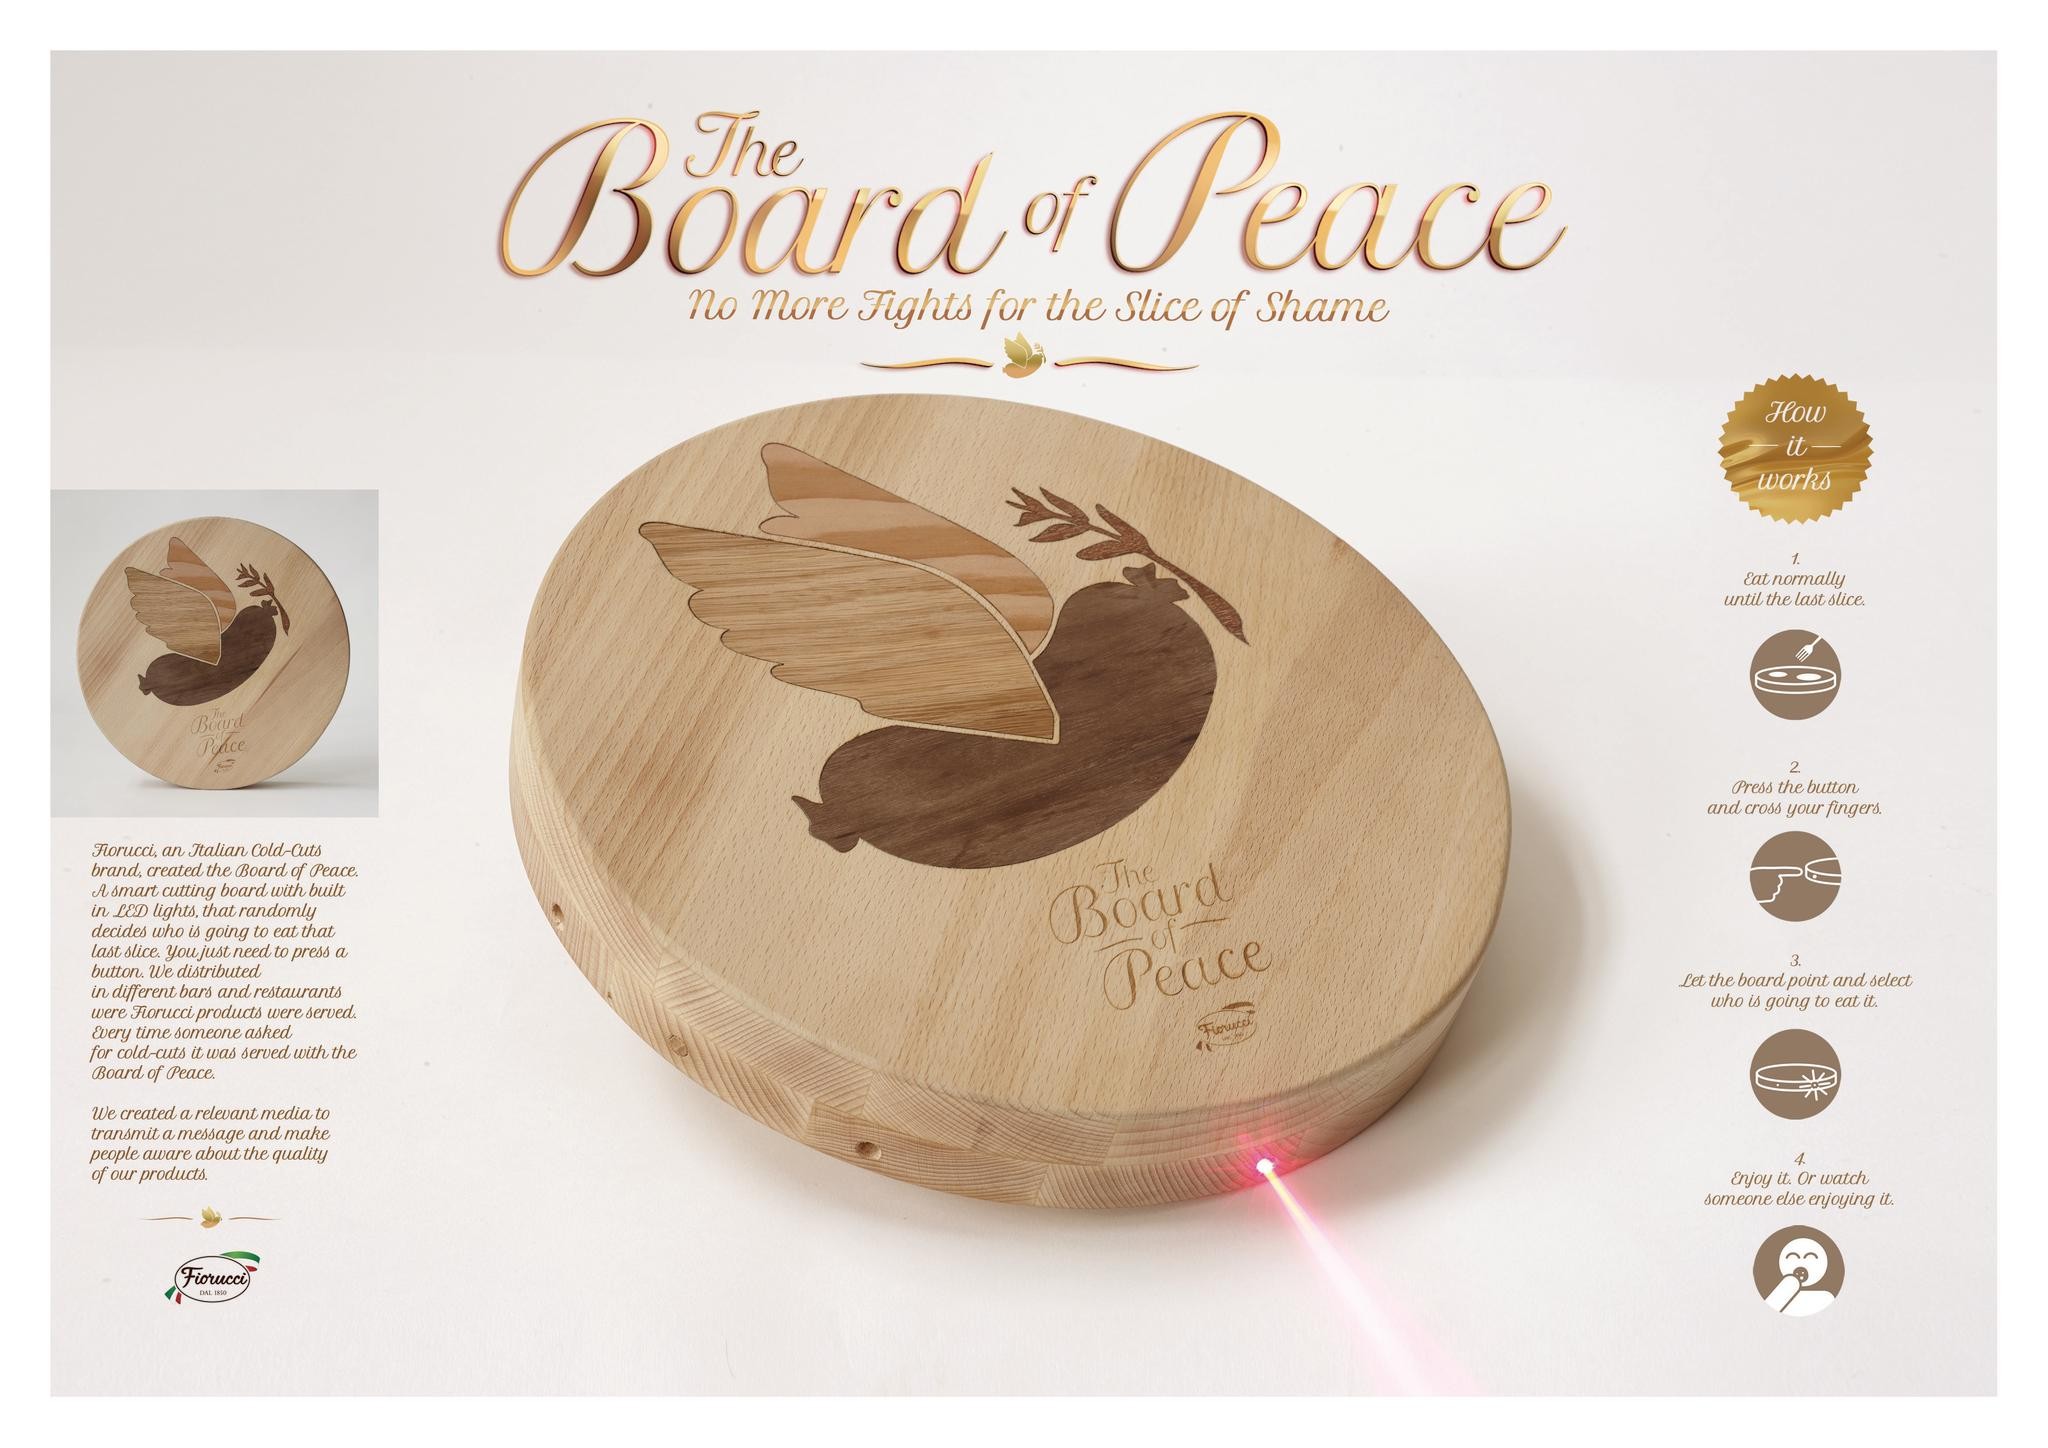 THE BOARD OF PEACE